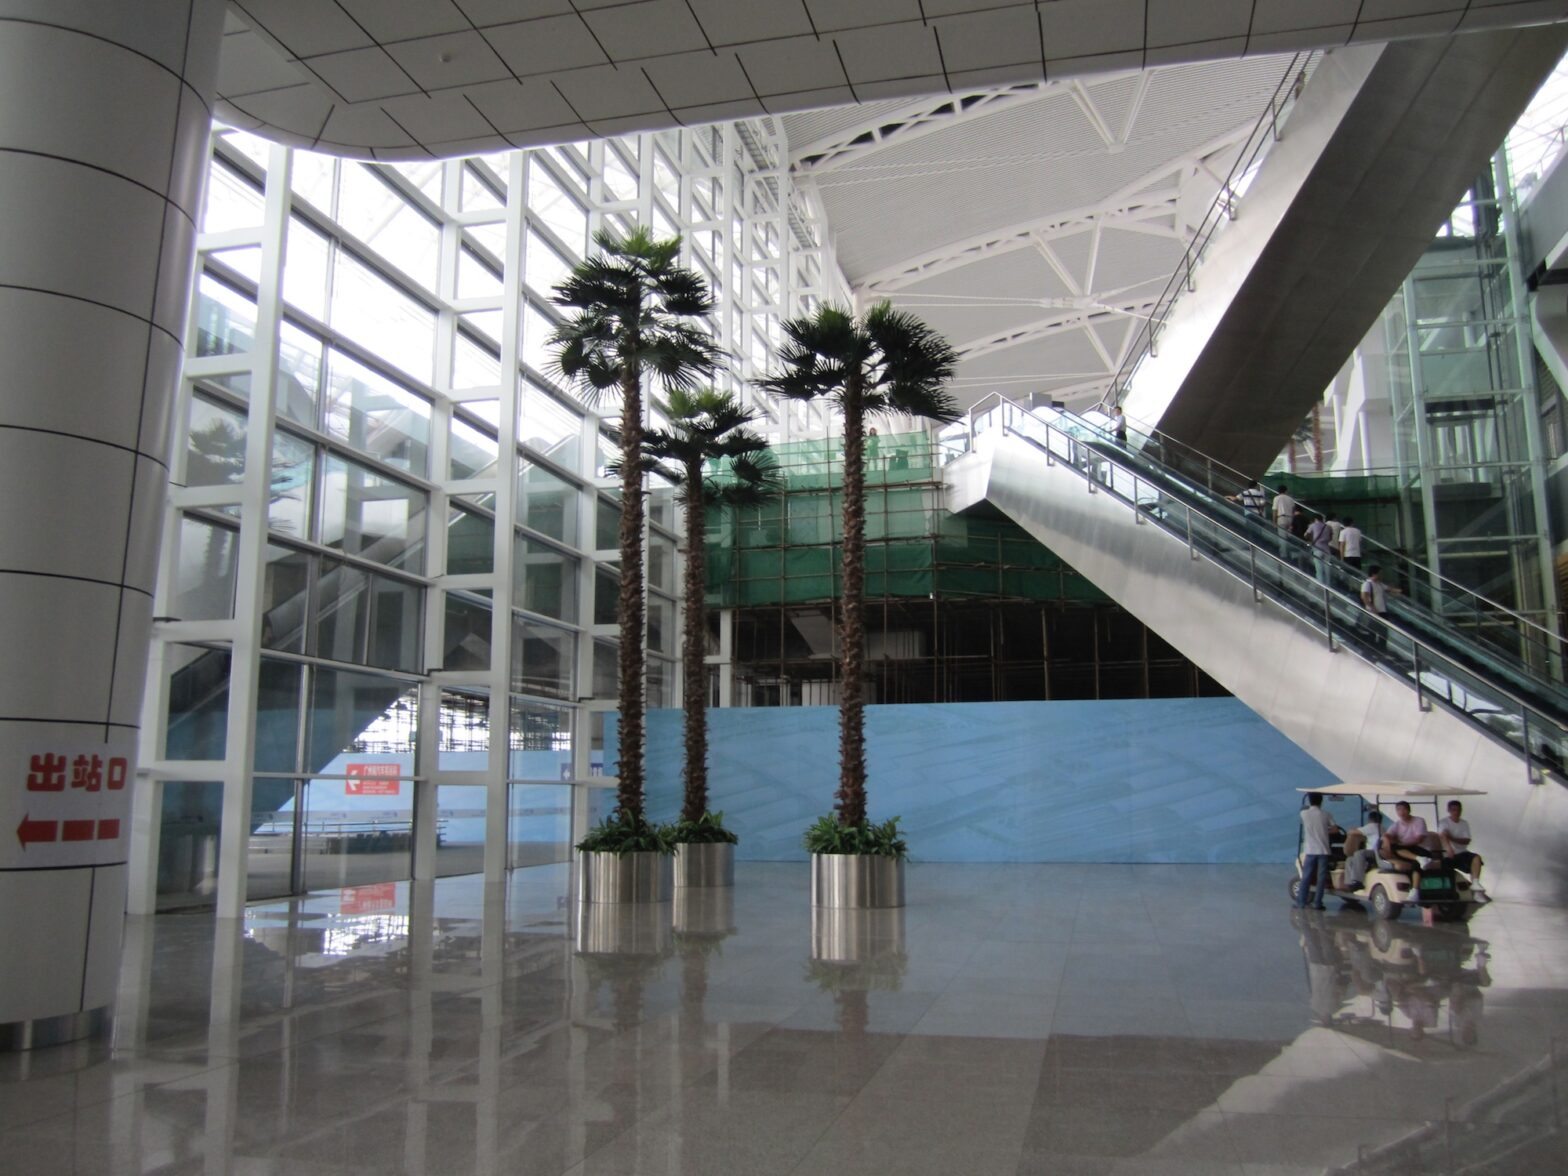 An image of the concordes at Guangzhou South Railway Station